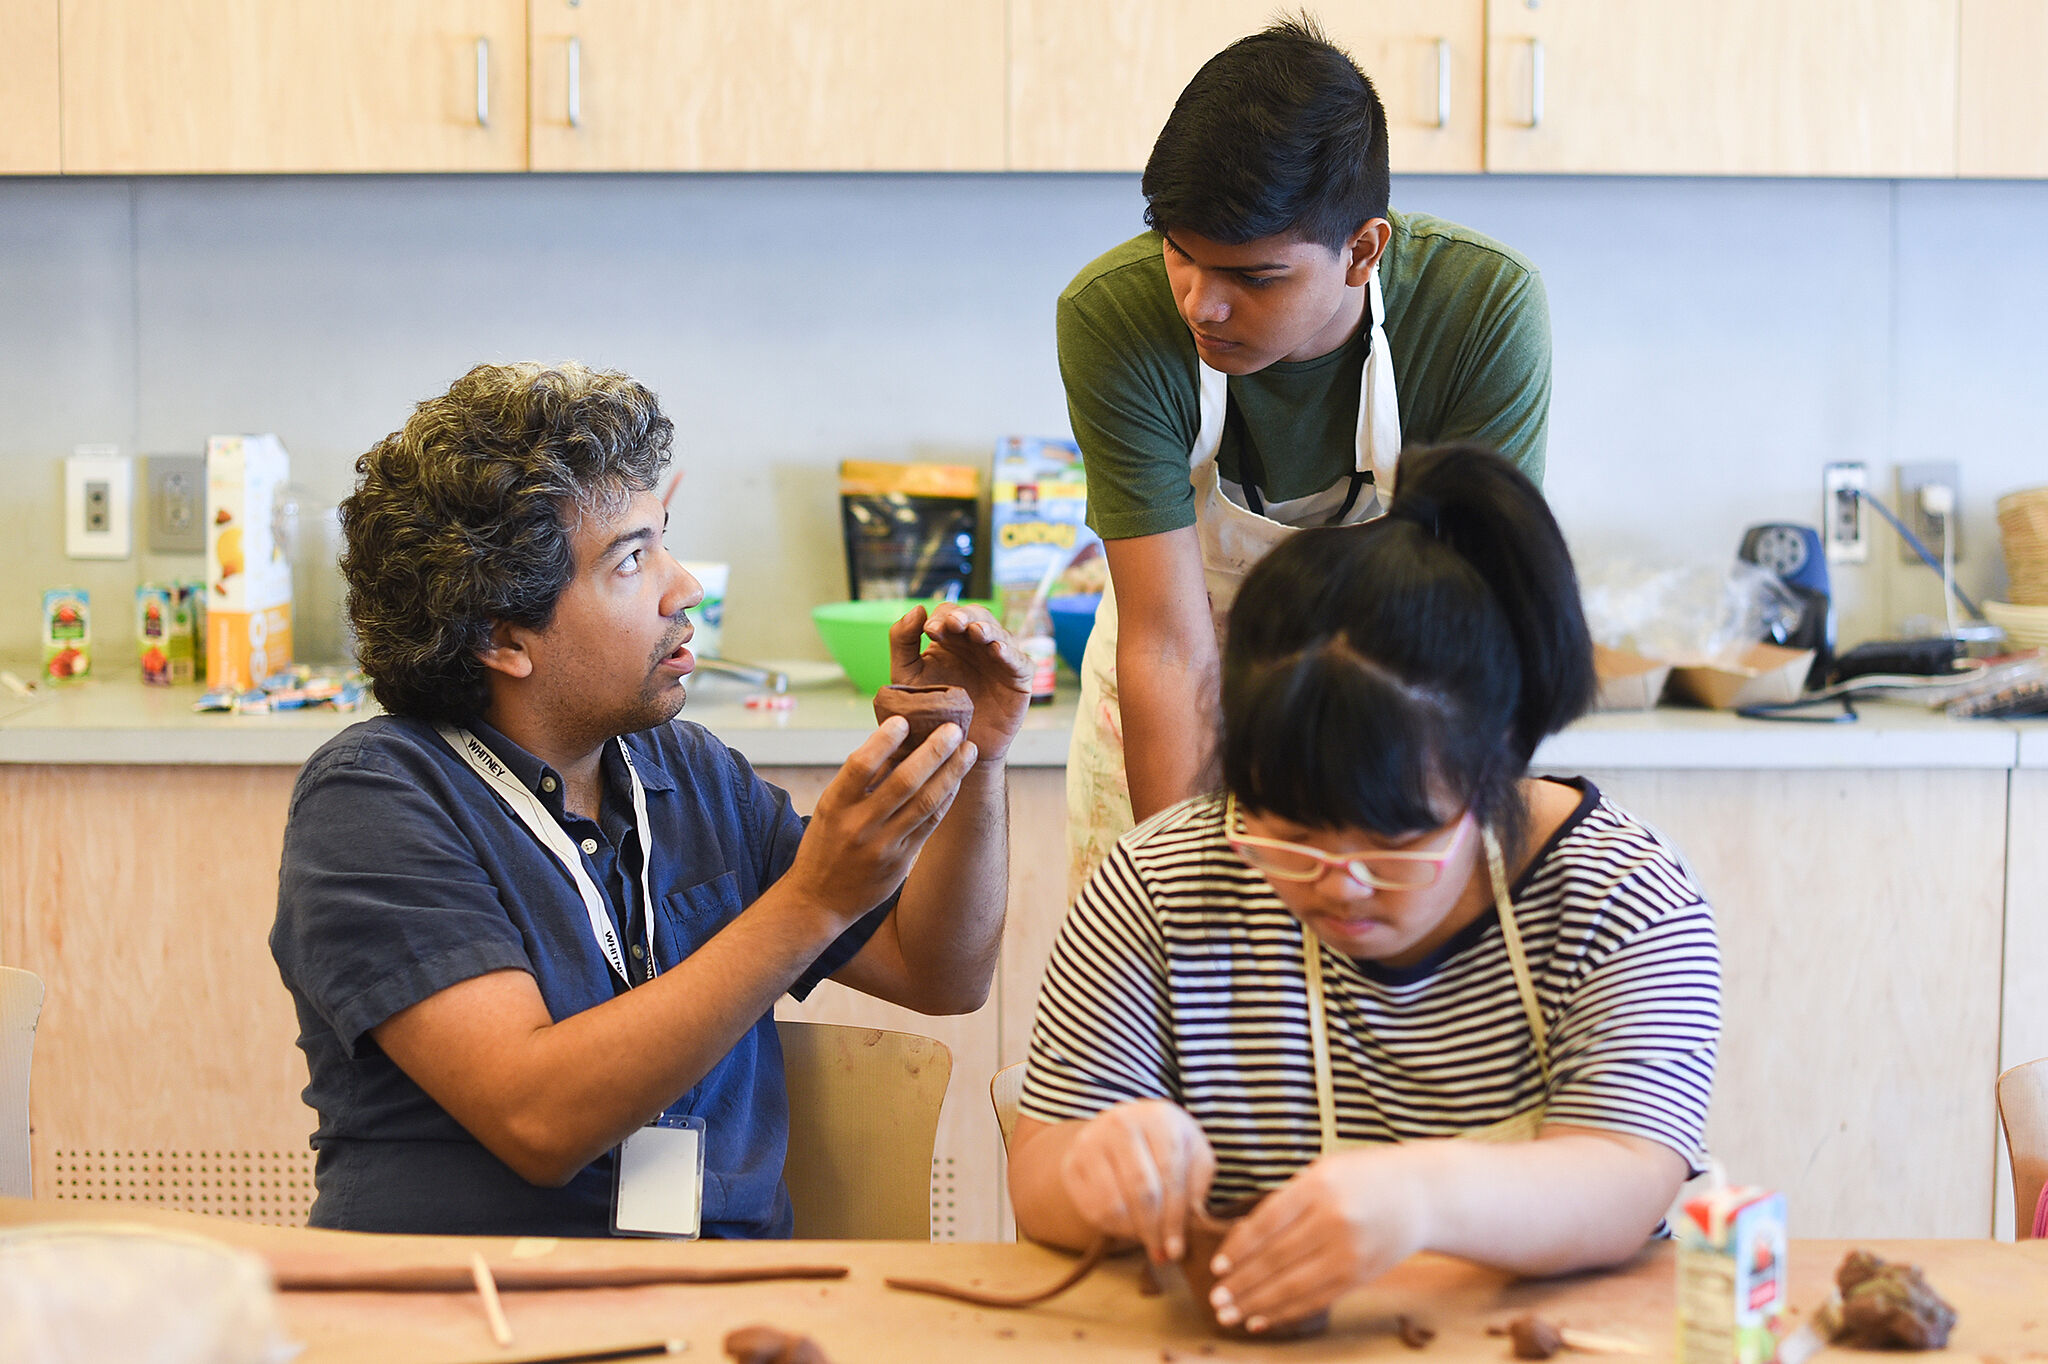 Instructor, Jorge González, speaks to two students. One student works with clay at a table, and the other stands by and listens.